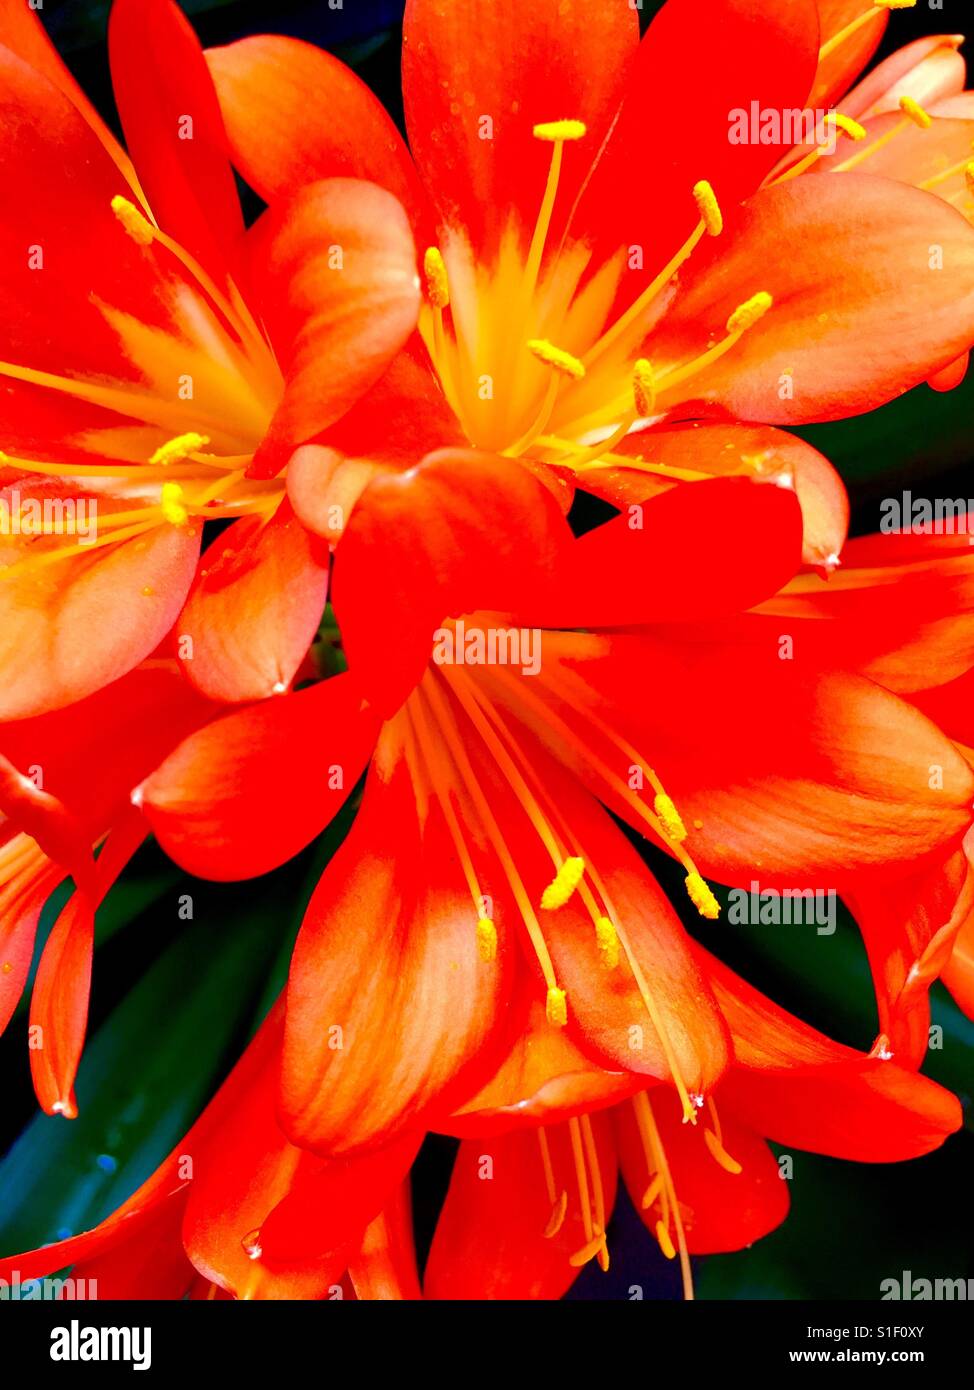 Spectacular Fire Lily, Bush Lily, Clivia, Clivia Lily, St. John's Lily, Boslelie,Clivia miniata, winter bloomer, deep orange flowers, sunshine-yellow centers, South Africa, India, Amaryllis Family Stock Photo